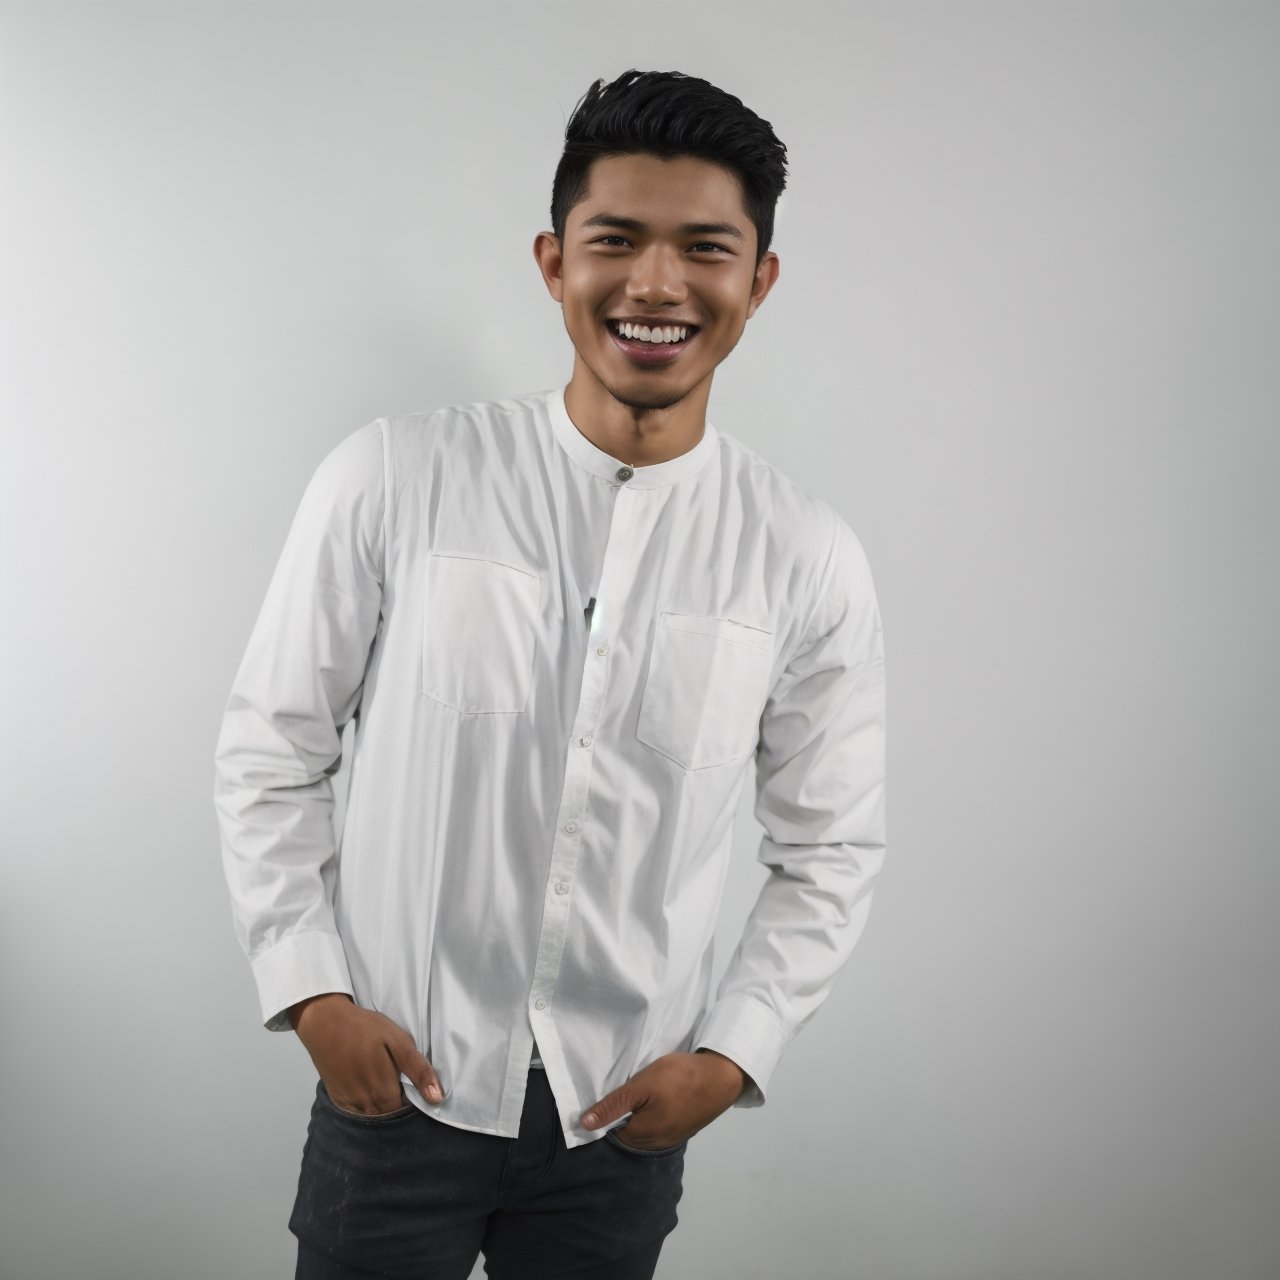 hair, studio background, 22  year old male, grin, open mouth, ,adjie